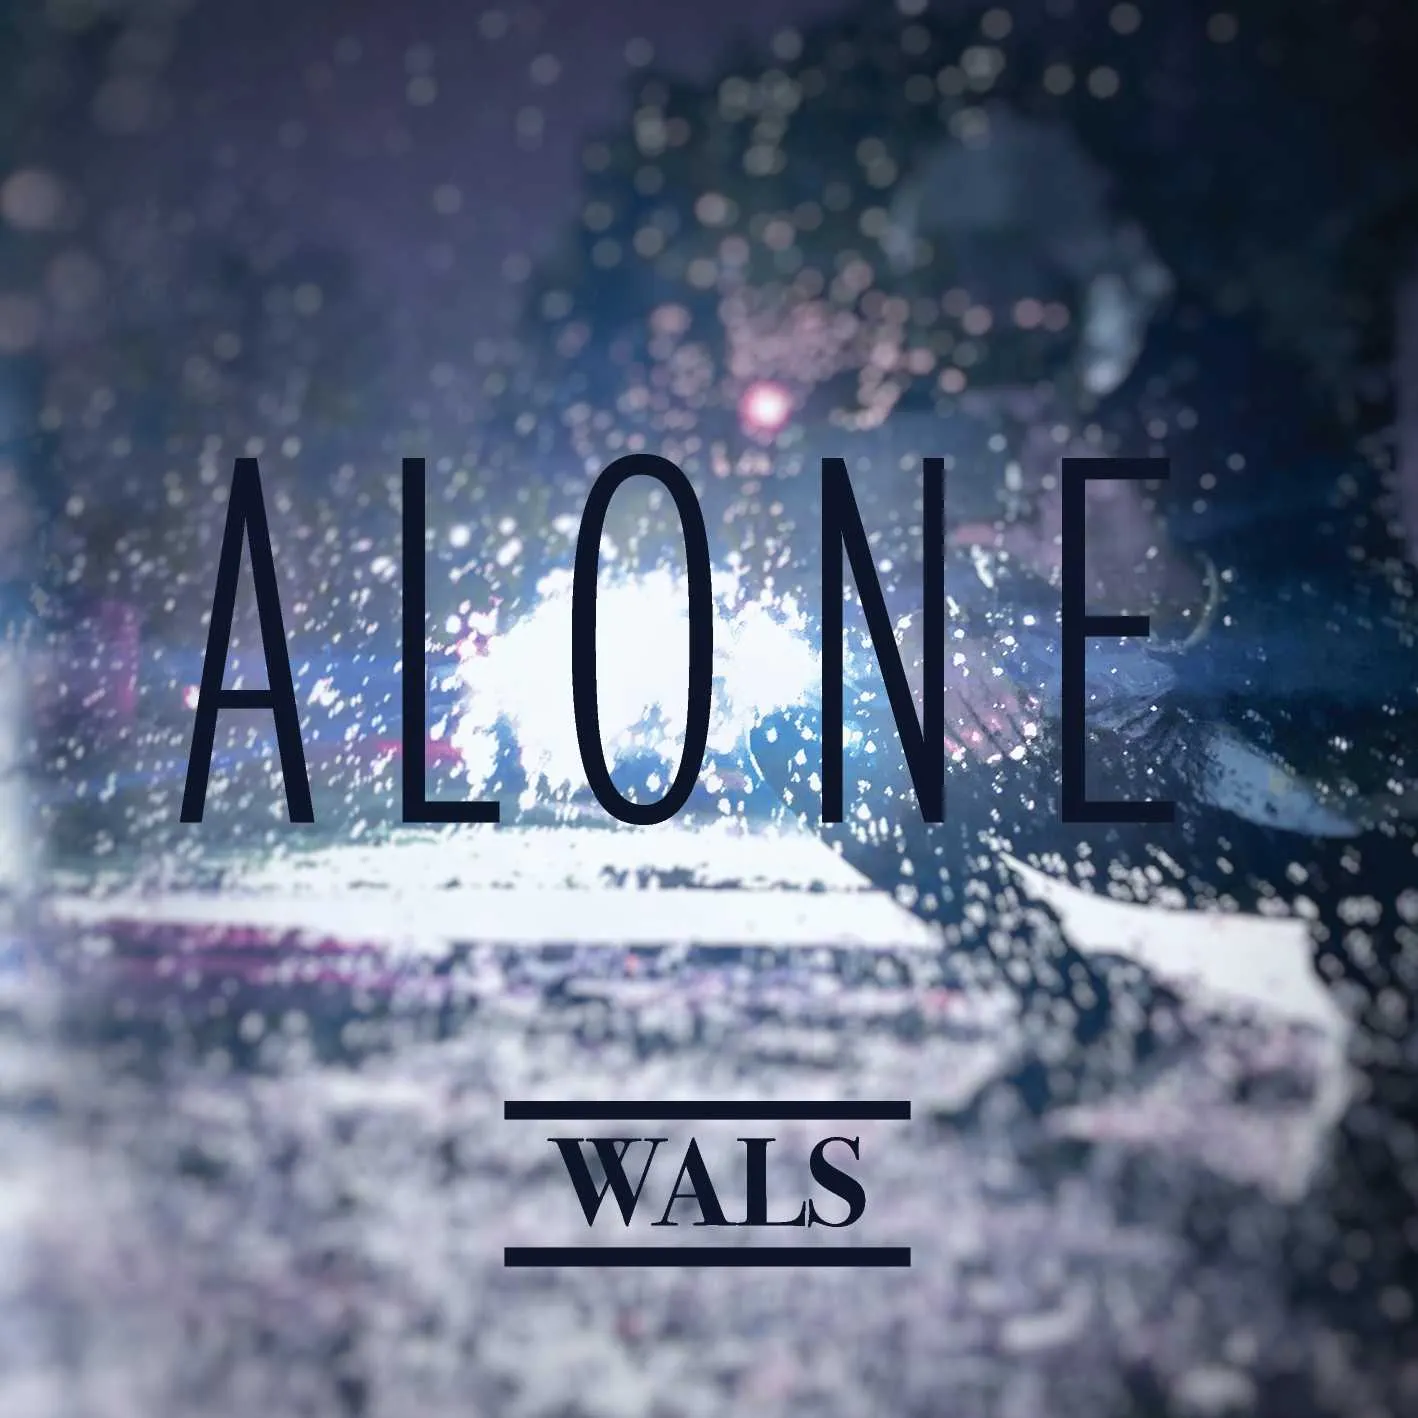 Album cover for “Alone” by Wals